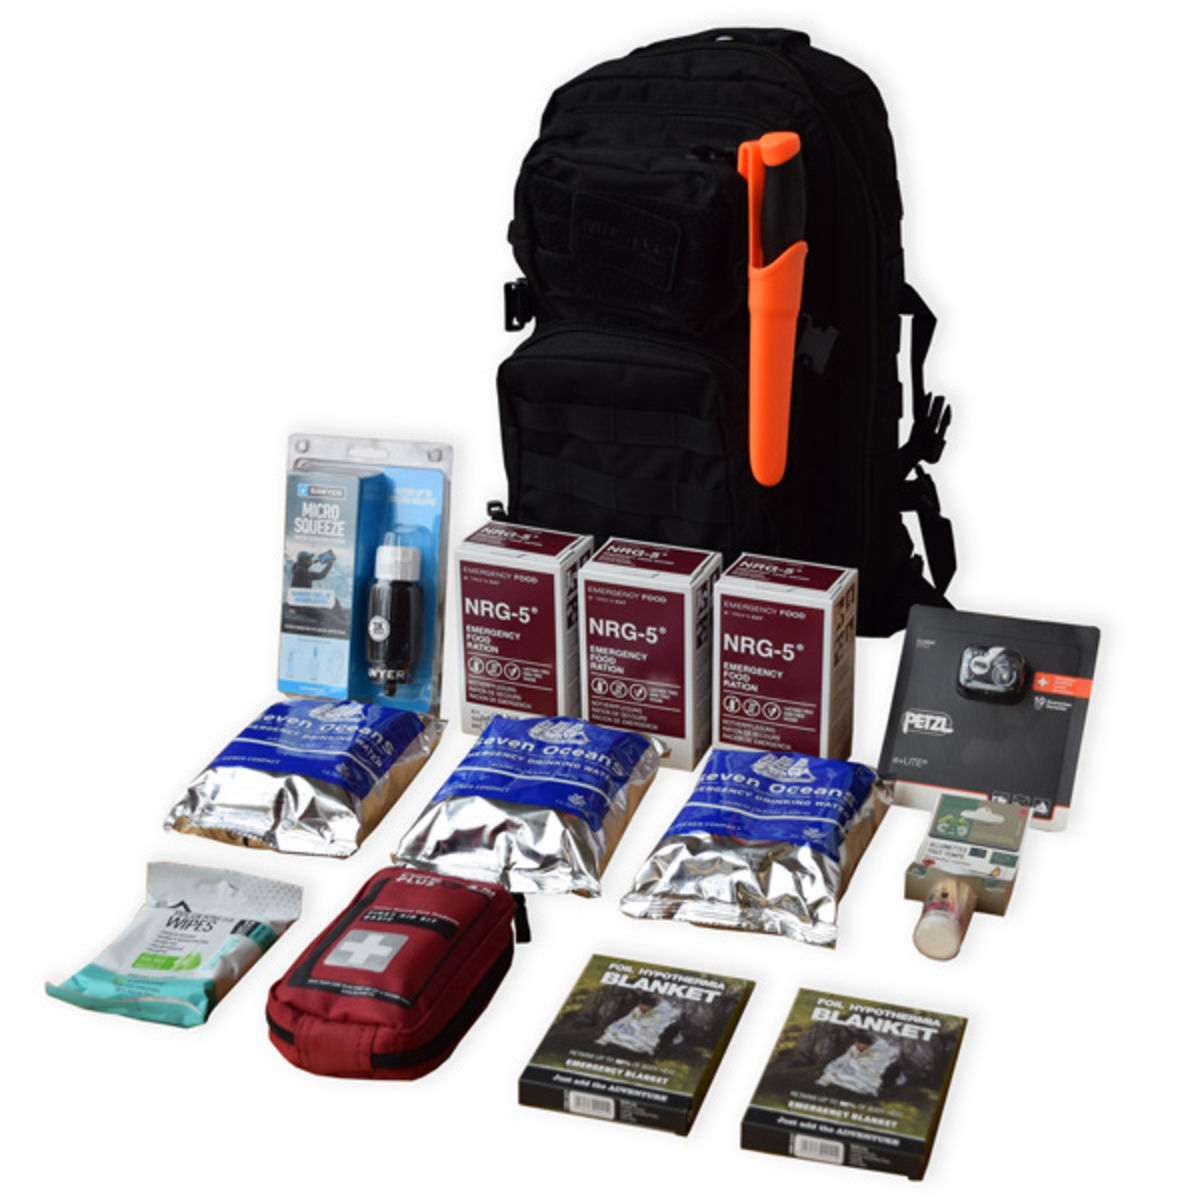 Bug out bag - 1 person - Essential